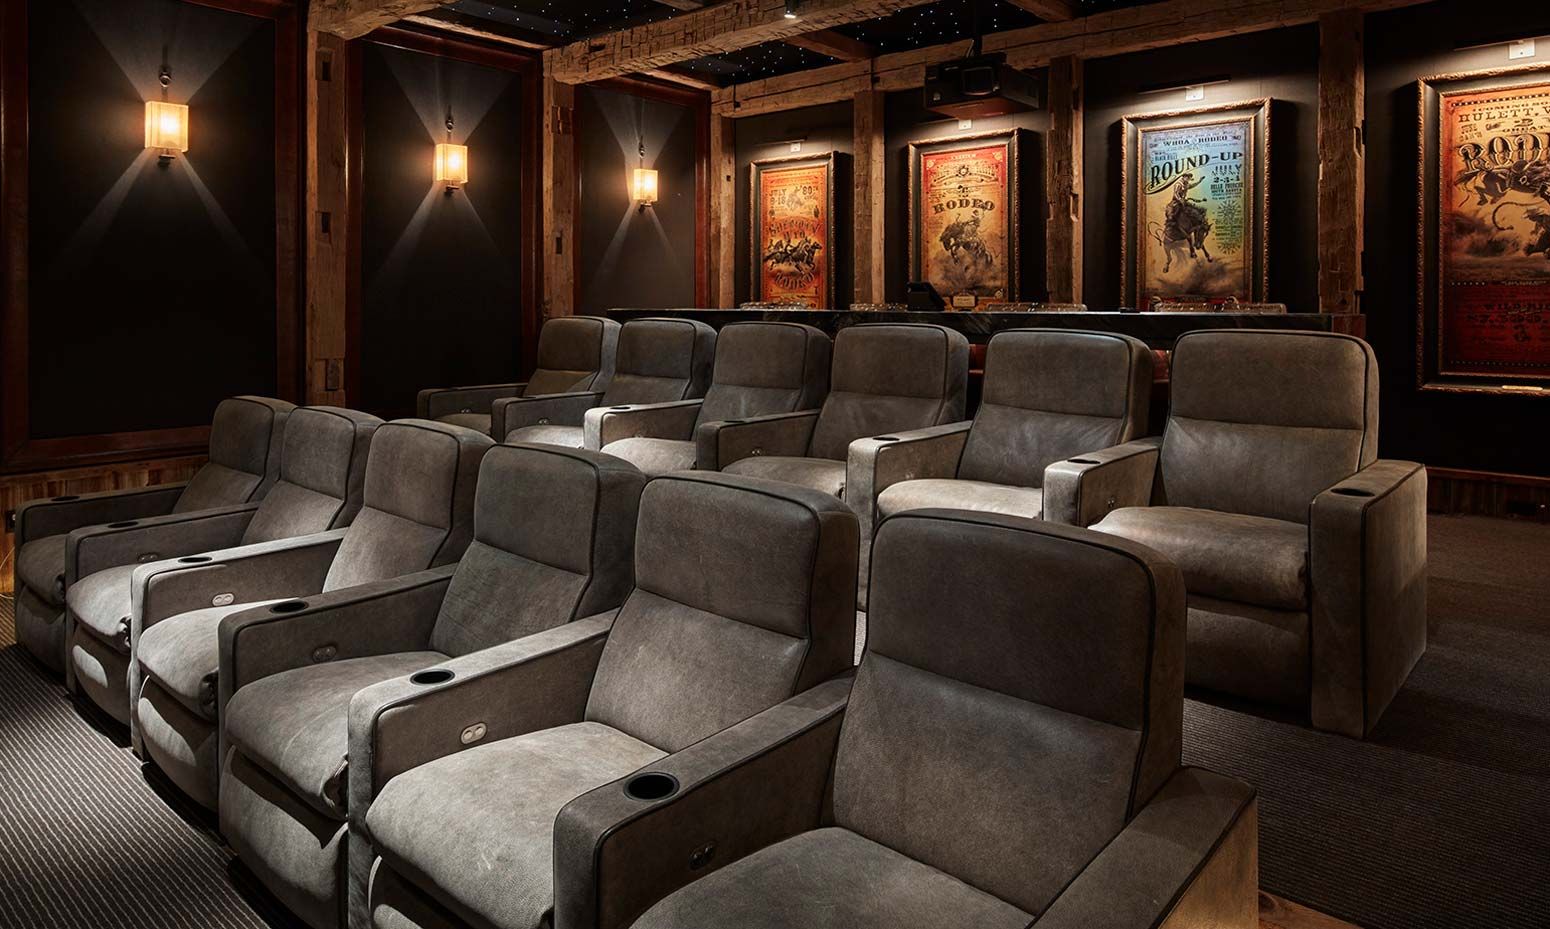 grey seats in a home theater with movie posters in background